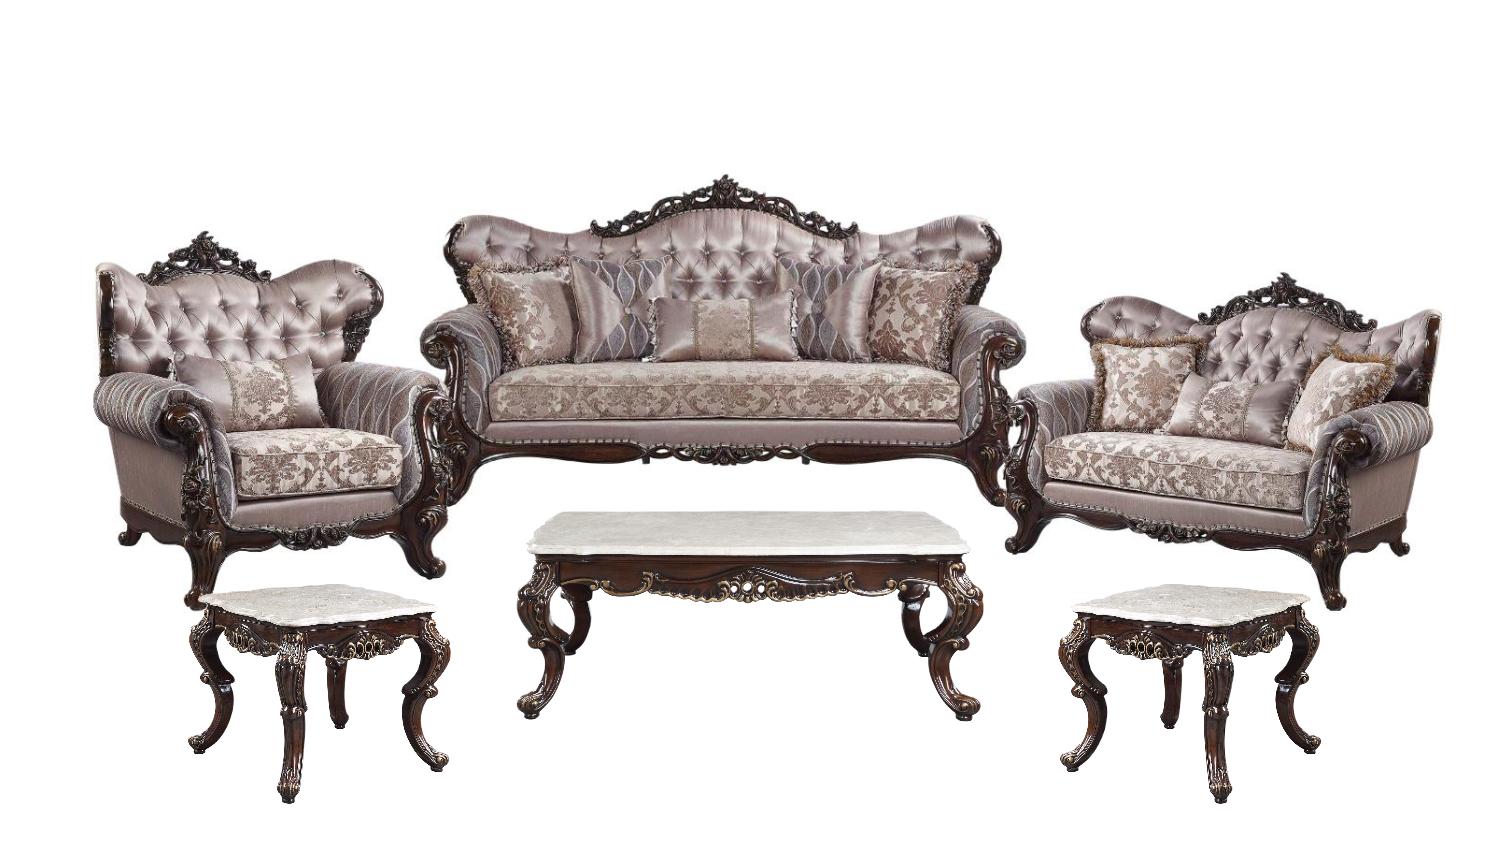 Traditional Sofa Loveseat Chair Coffee Table Two End Tables Benbek LV00809-6pcs in Wash Oak Fabric